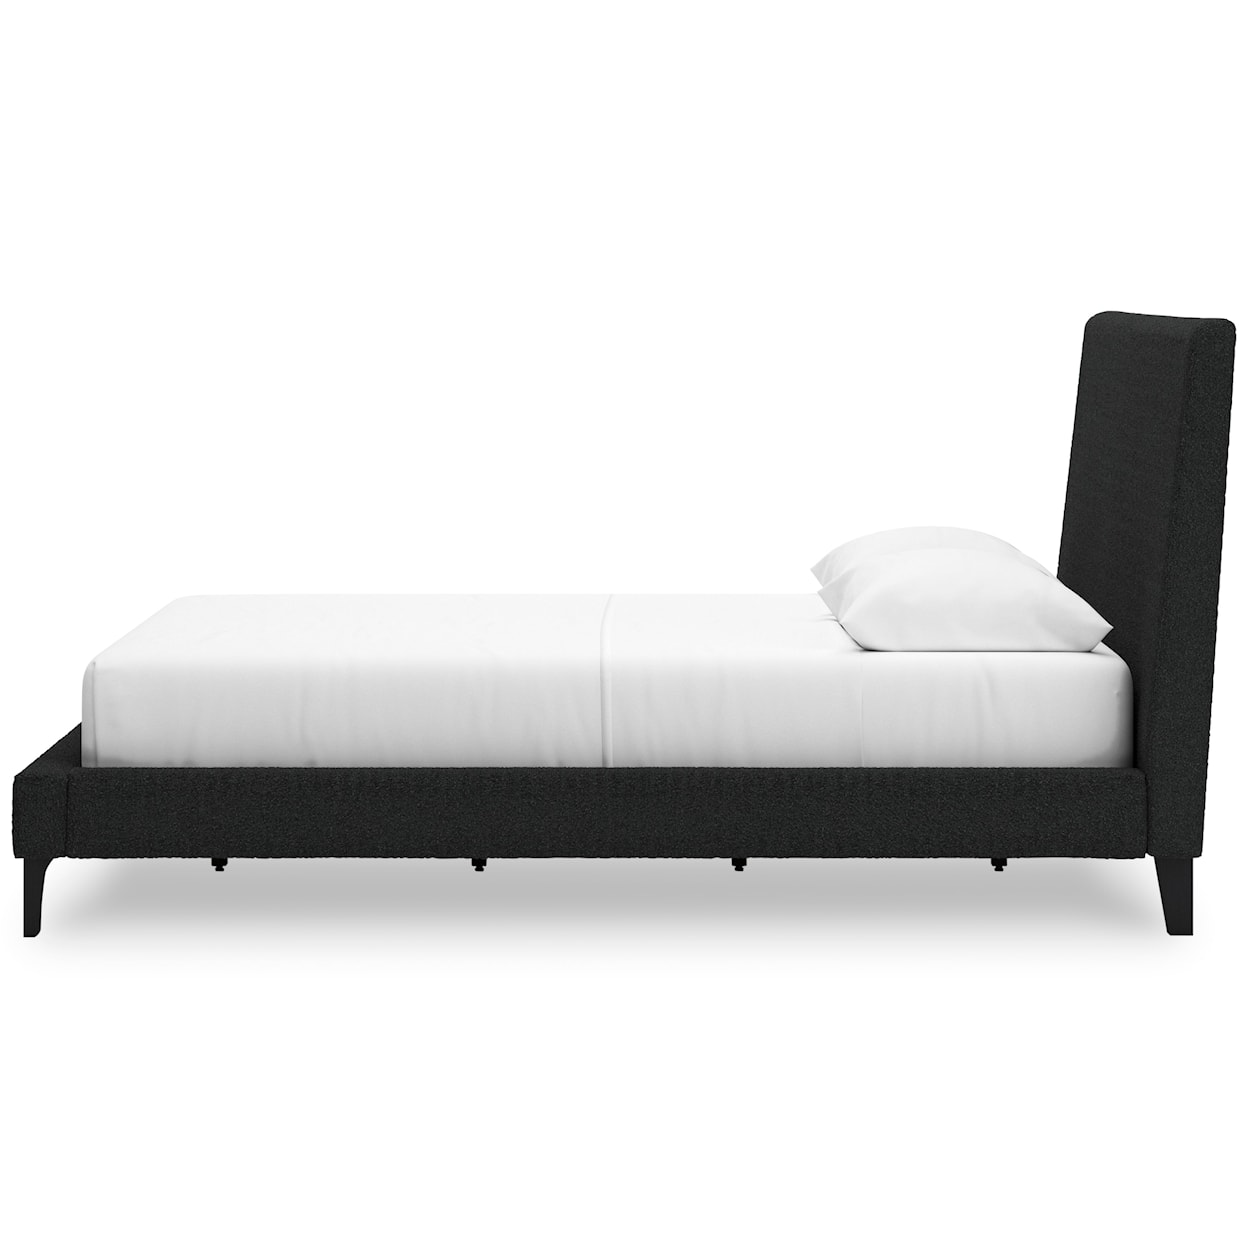 Signature Design by Ashley Cadmori Queen Upholstered Bed With Roll Slats